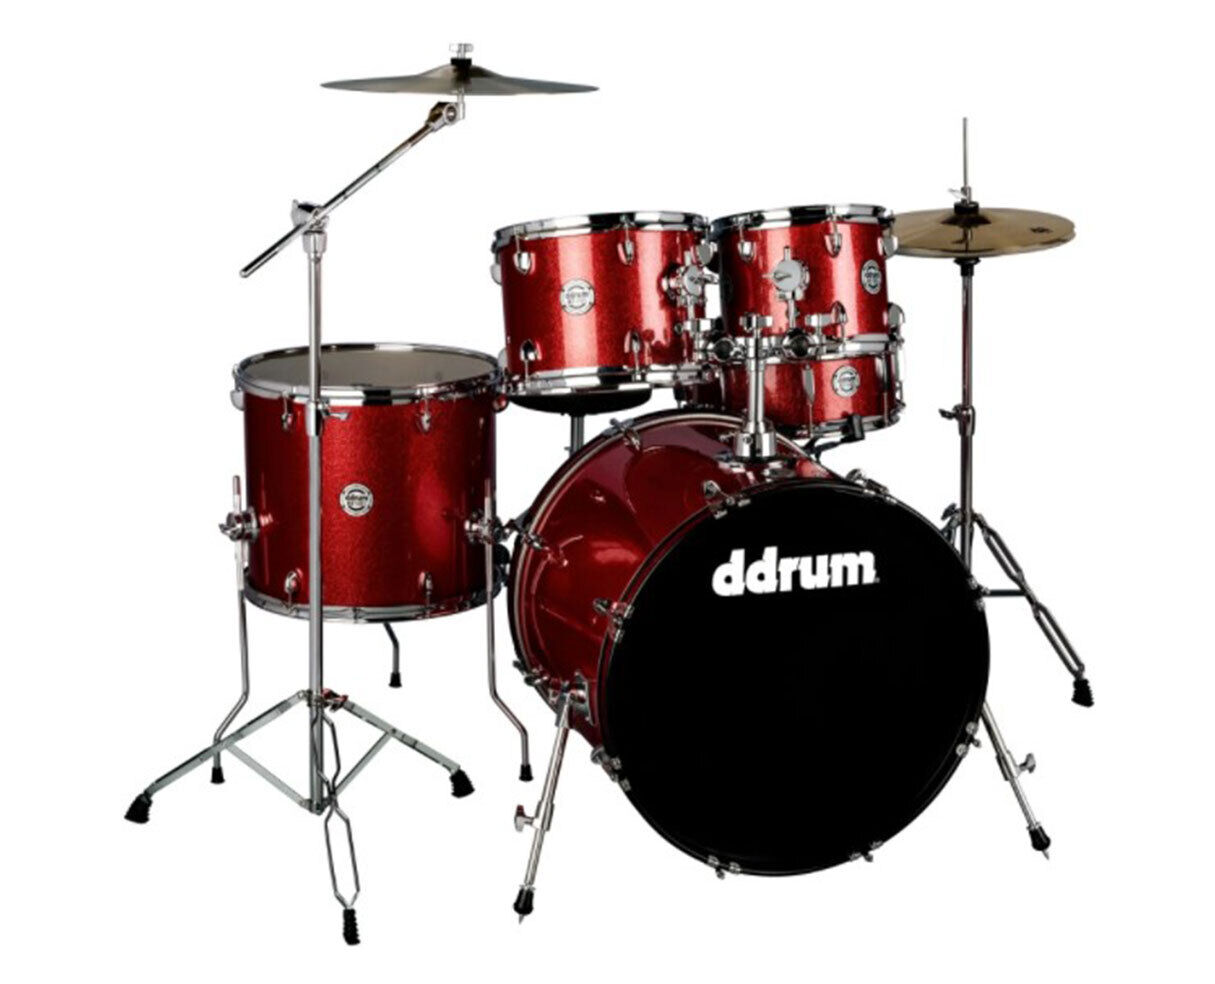 ddrum D2 5pc Drum Kit w/ Cymbals – Red Sparkle – Used 1